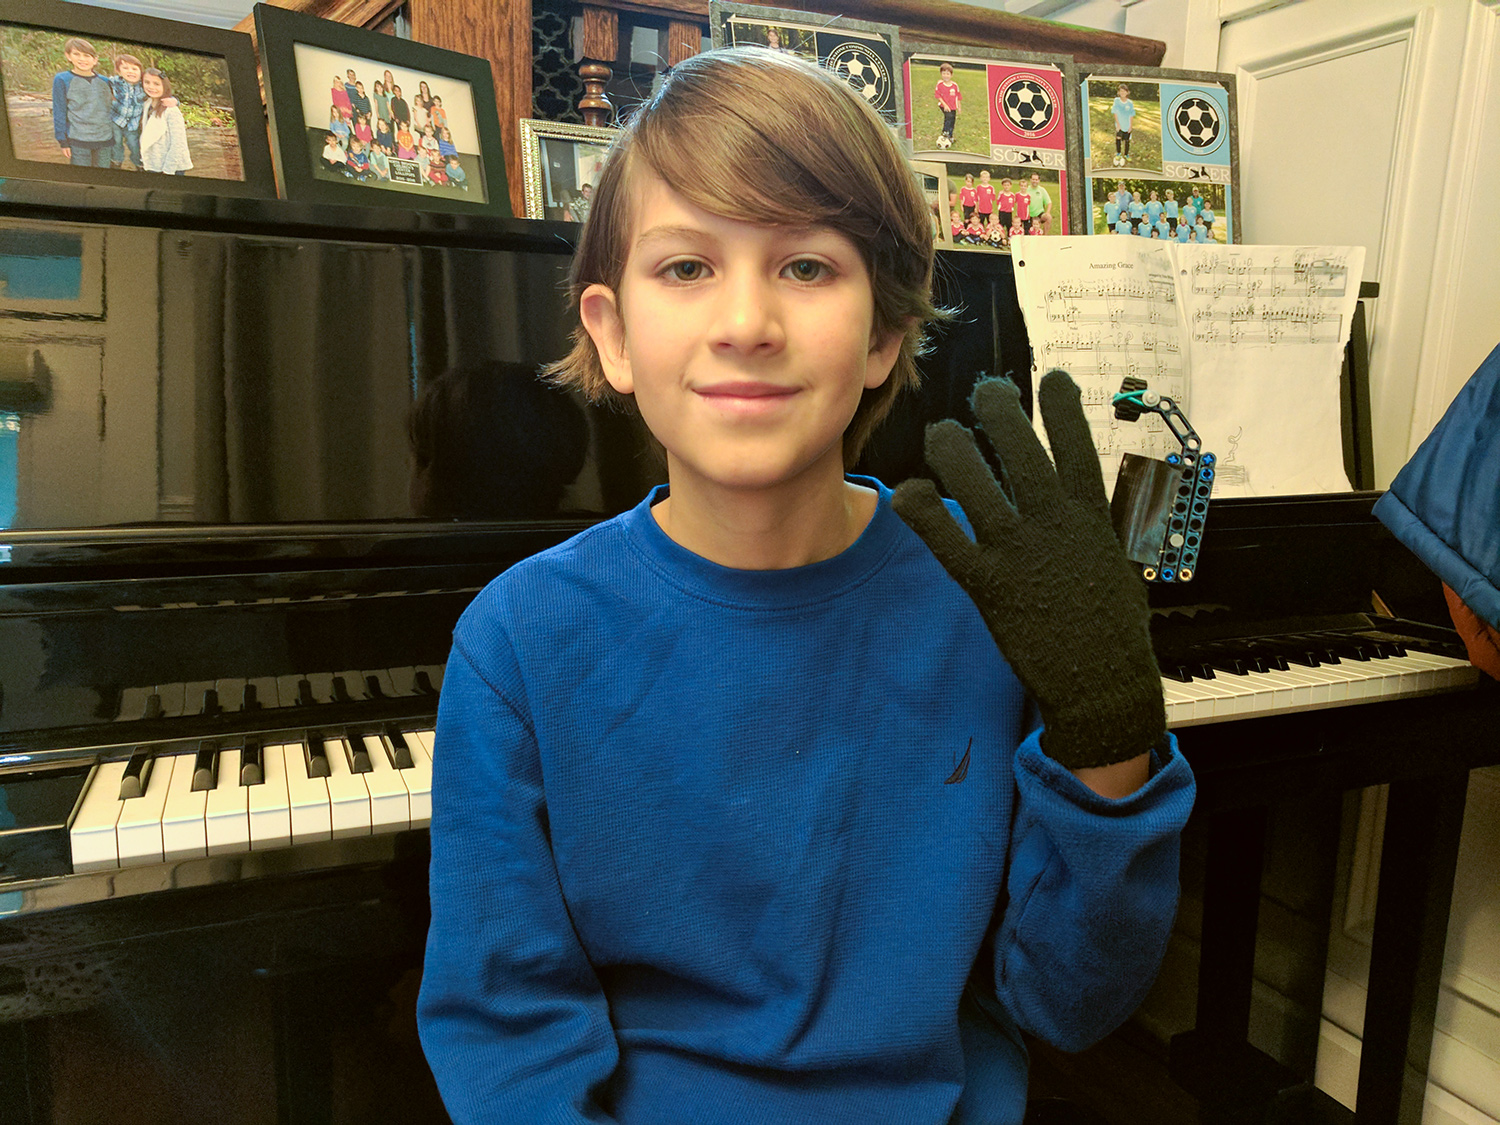 A fifth-grade boy wearing a blue sweater sitting on a piano bench wearing a glove that has a mechanical extension to increase the finger-reach span for pianists.